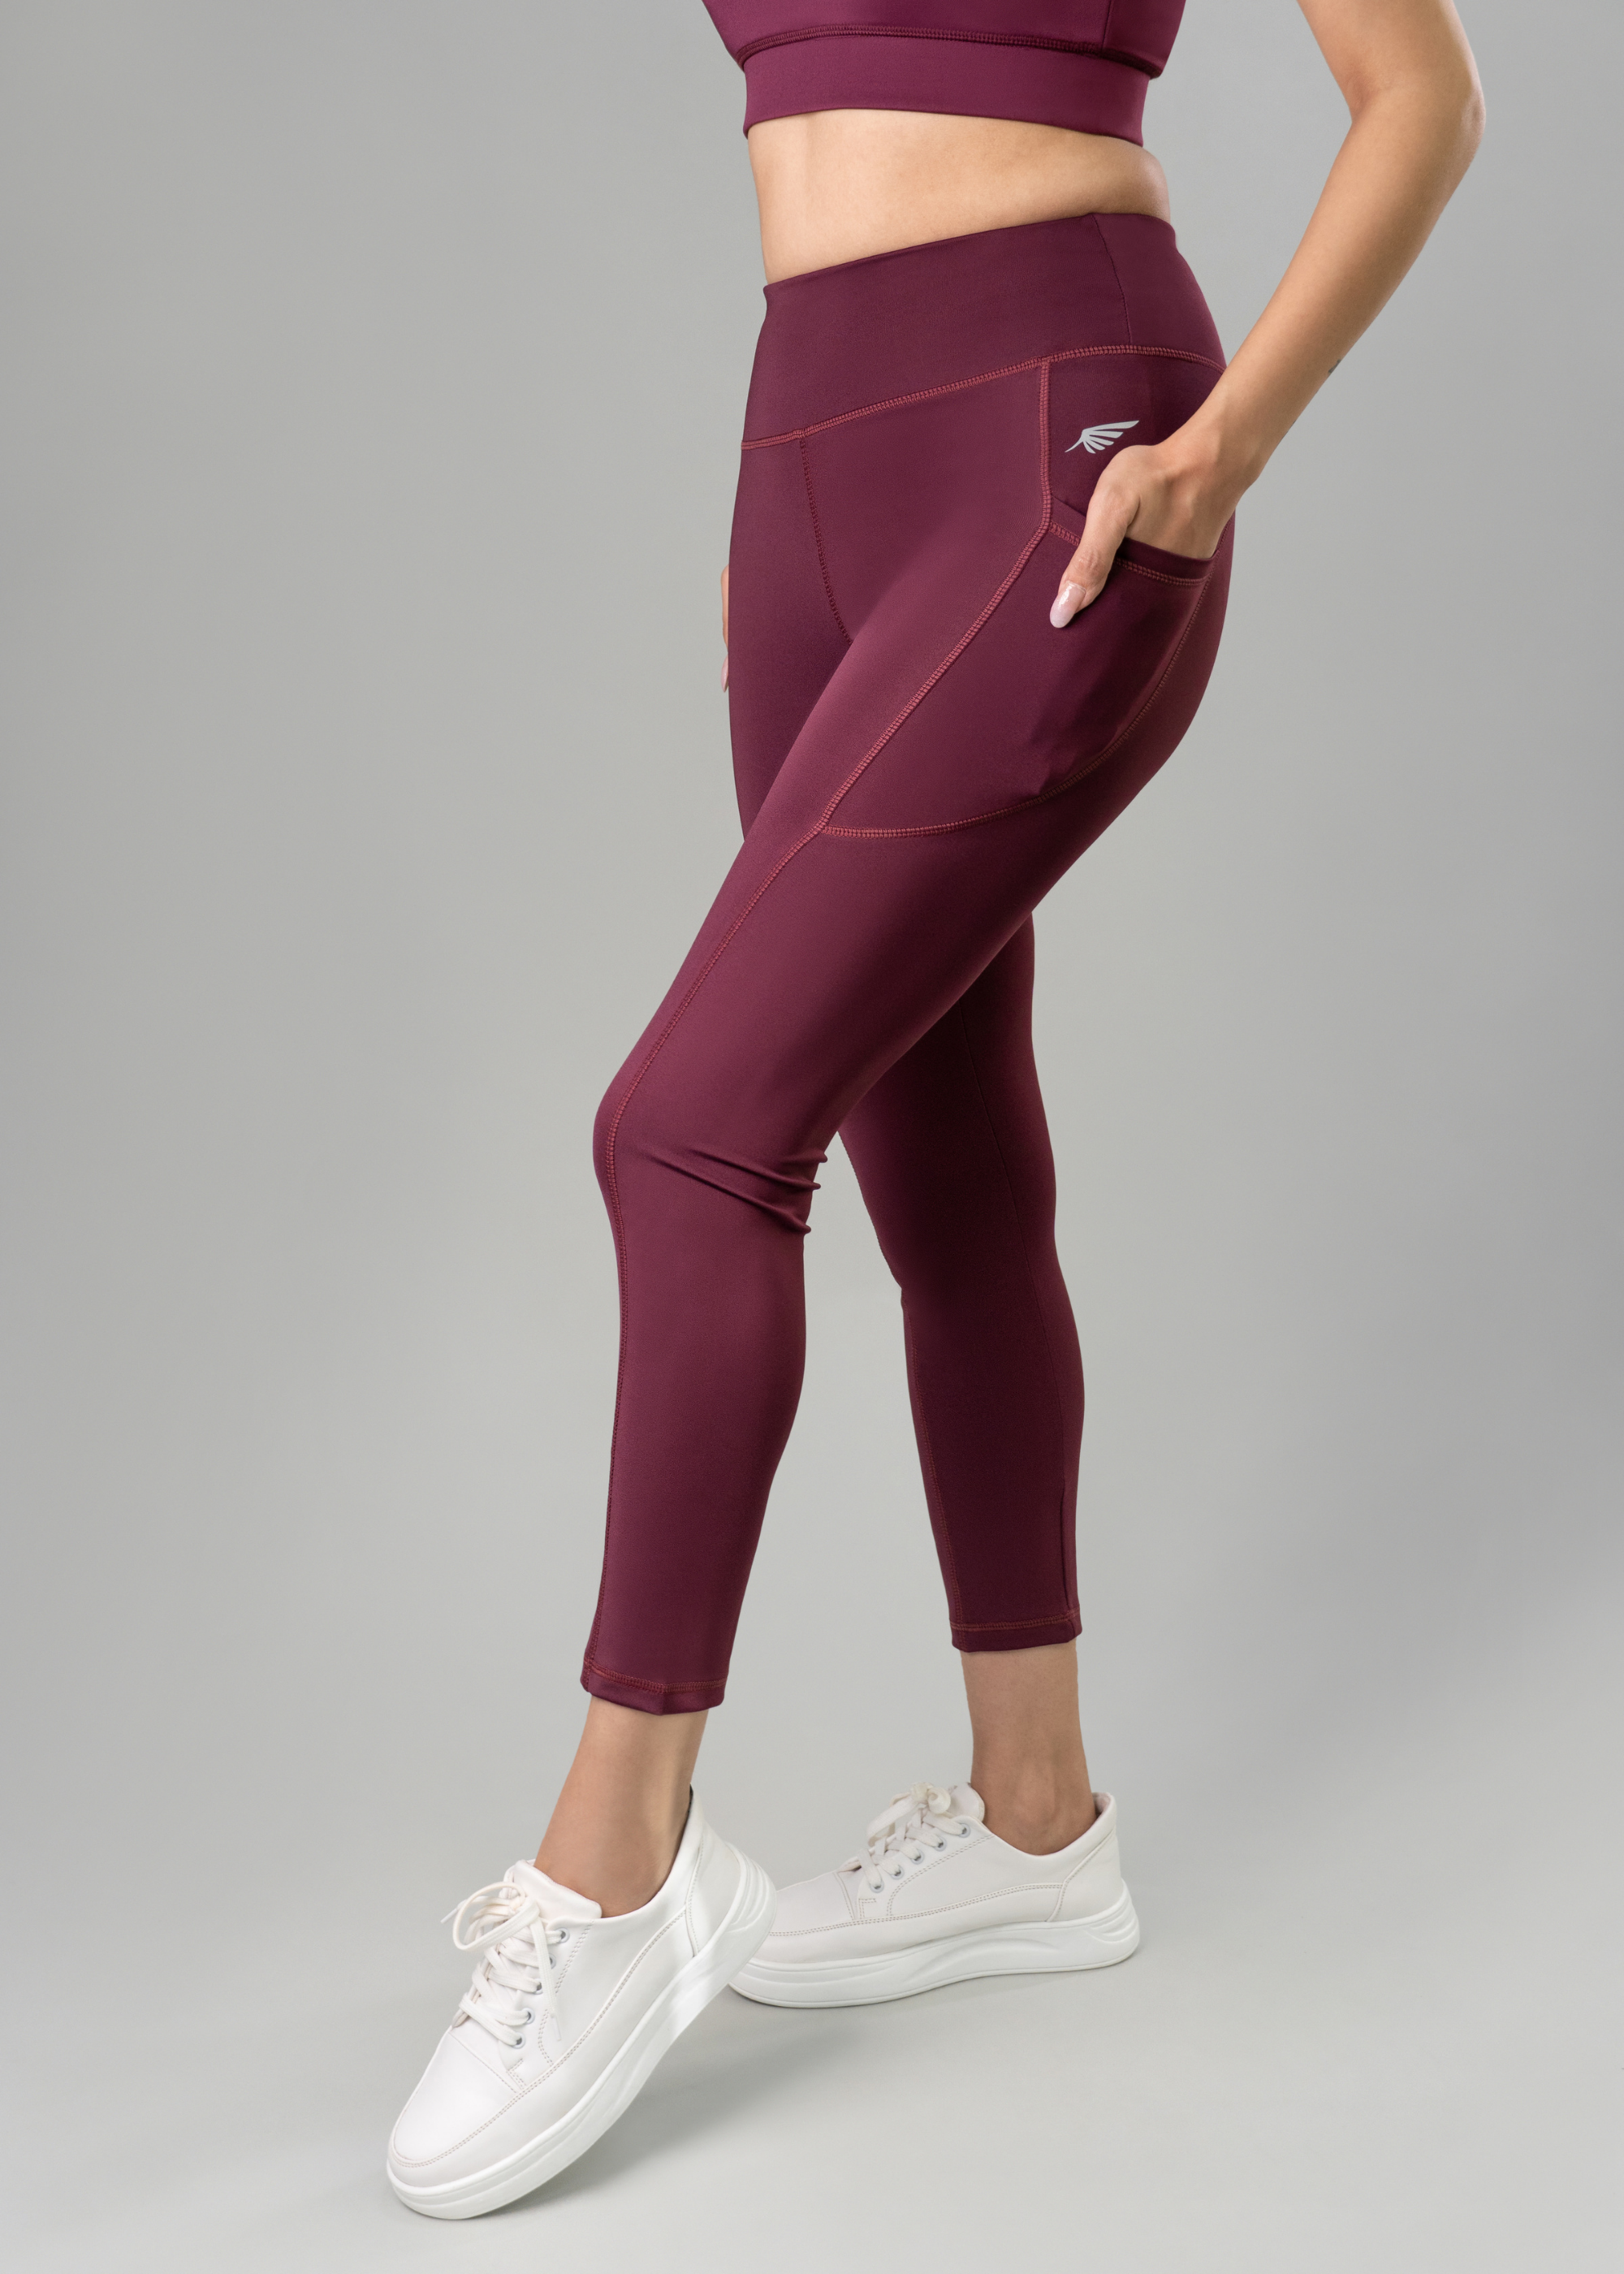 Everyday Tights for Women - Flurr